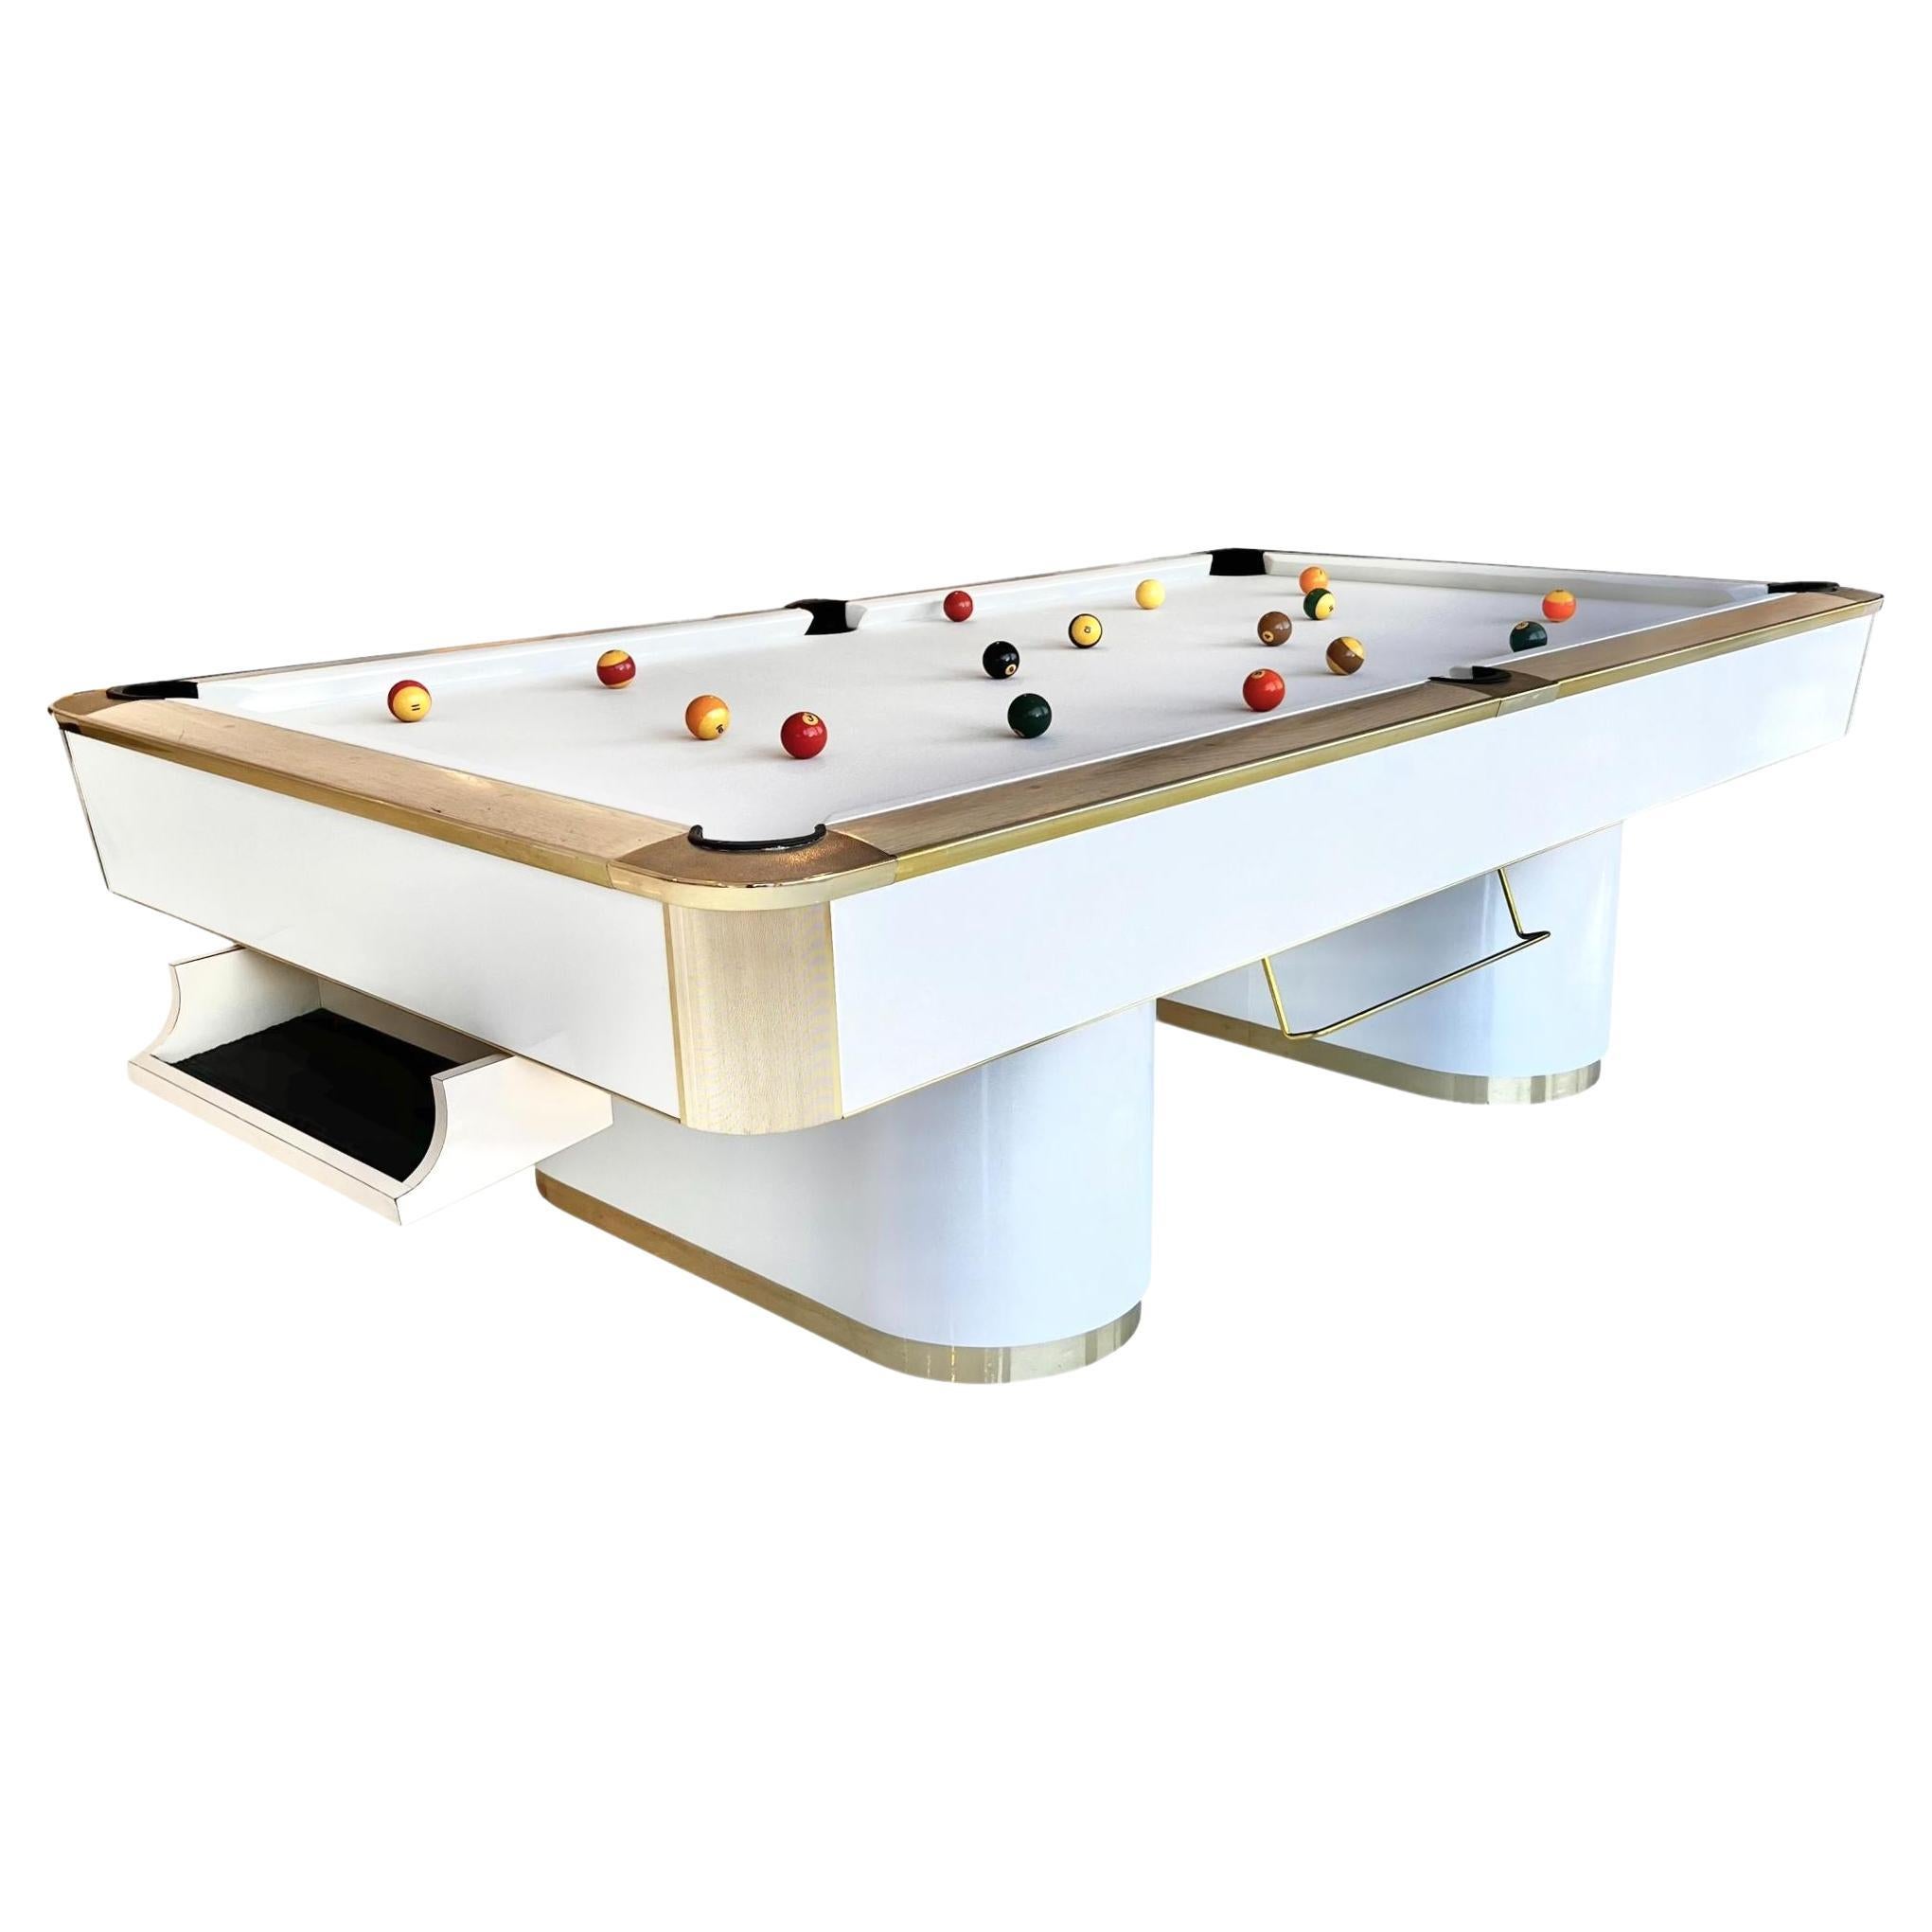 Brass and Formica Murrey Pool Table, 1980s California